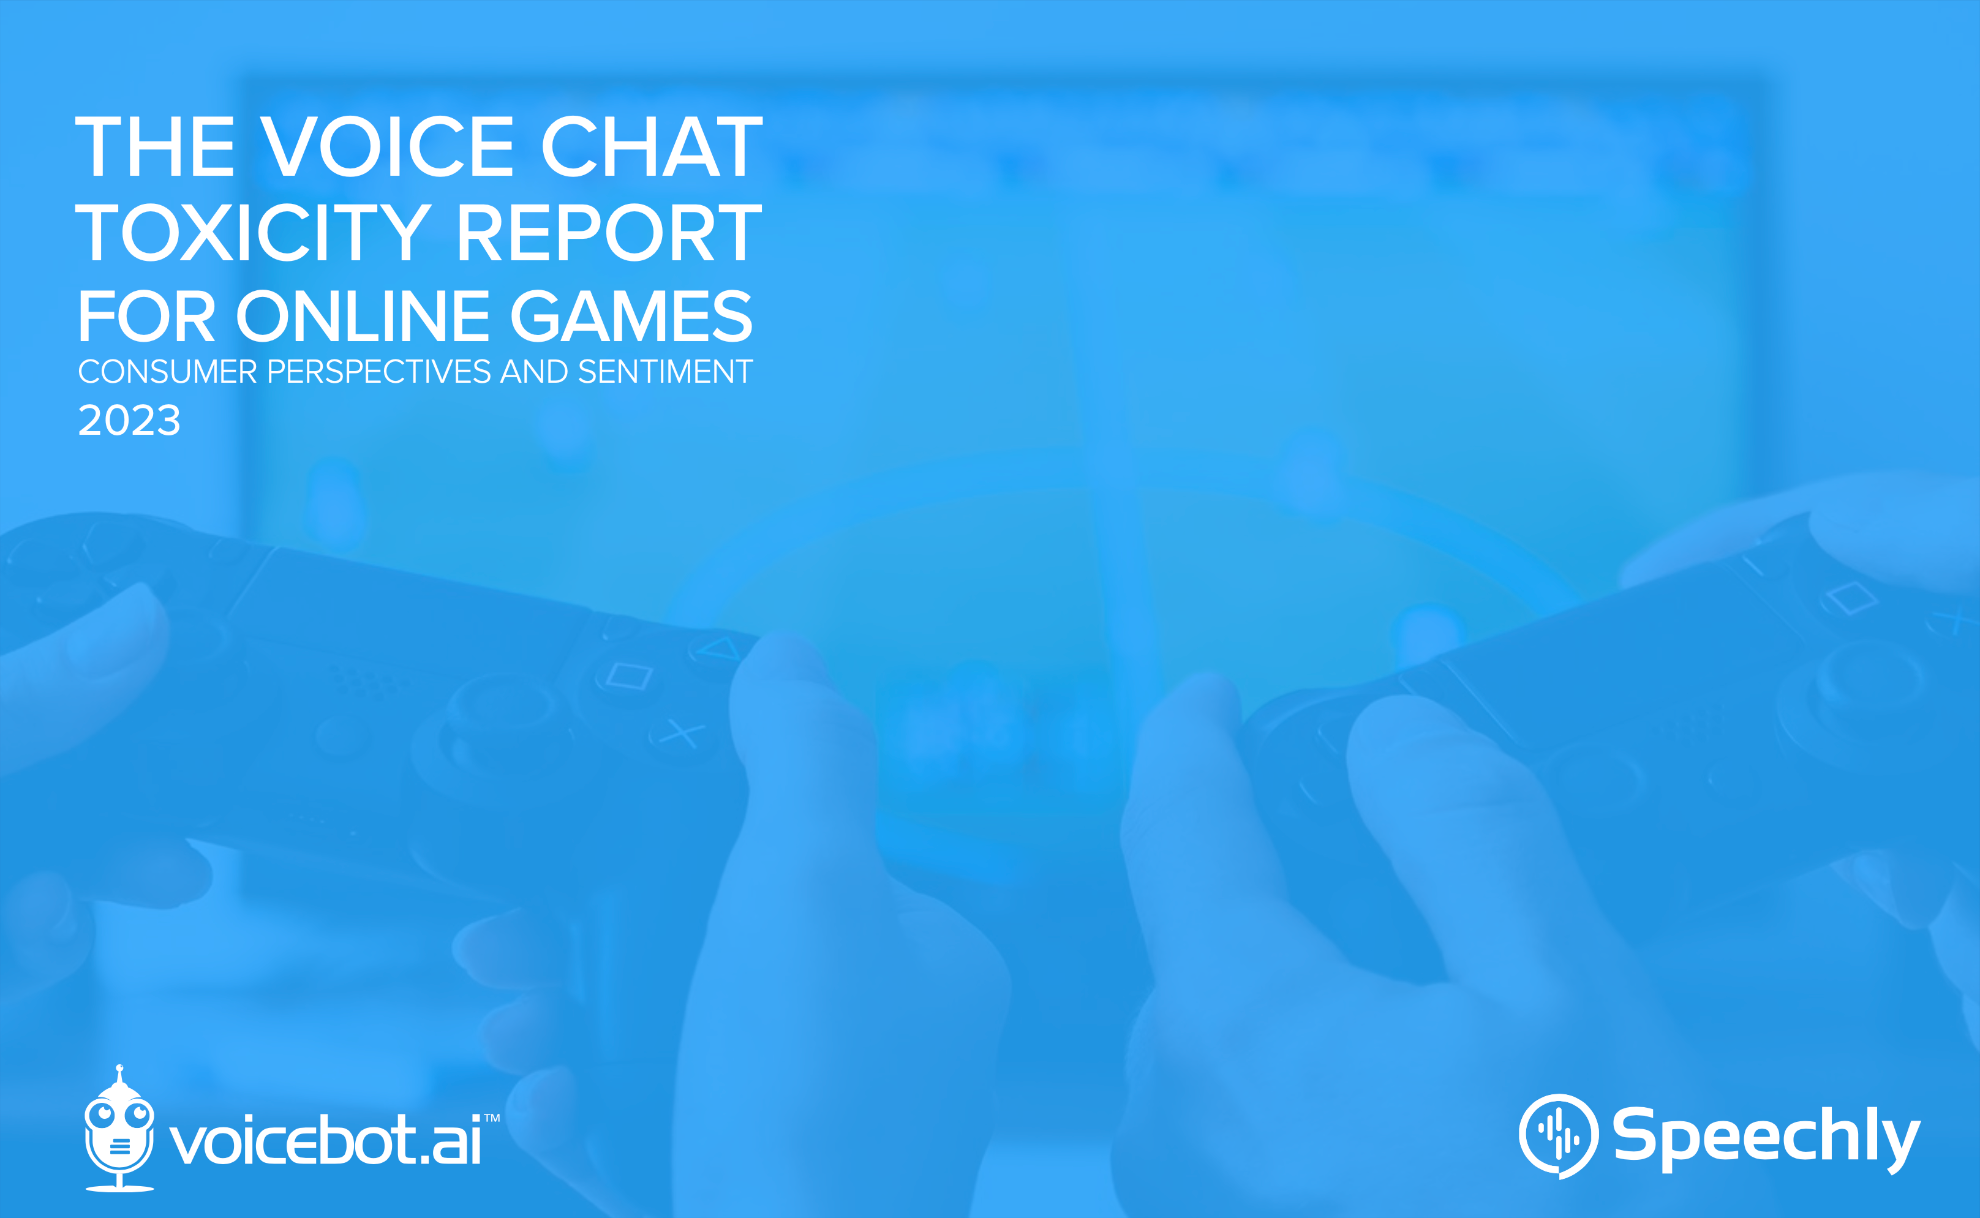 The Voice Chat Toxicity Report for Online Games